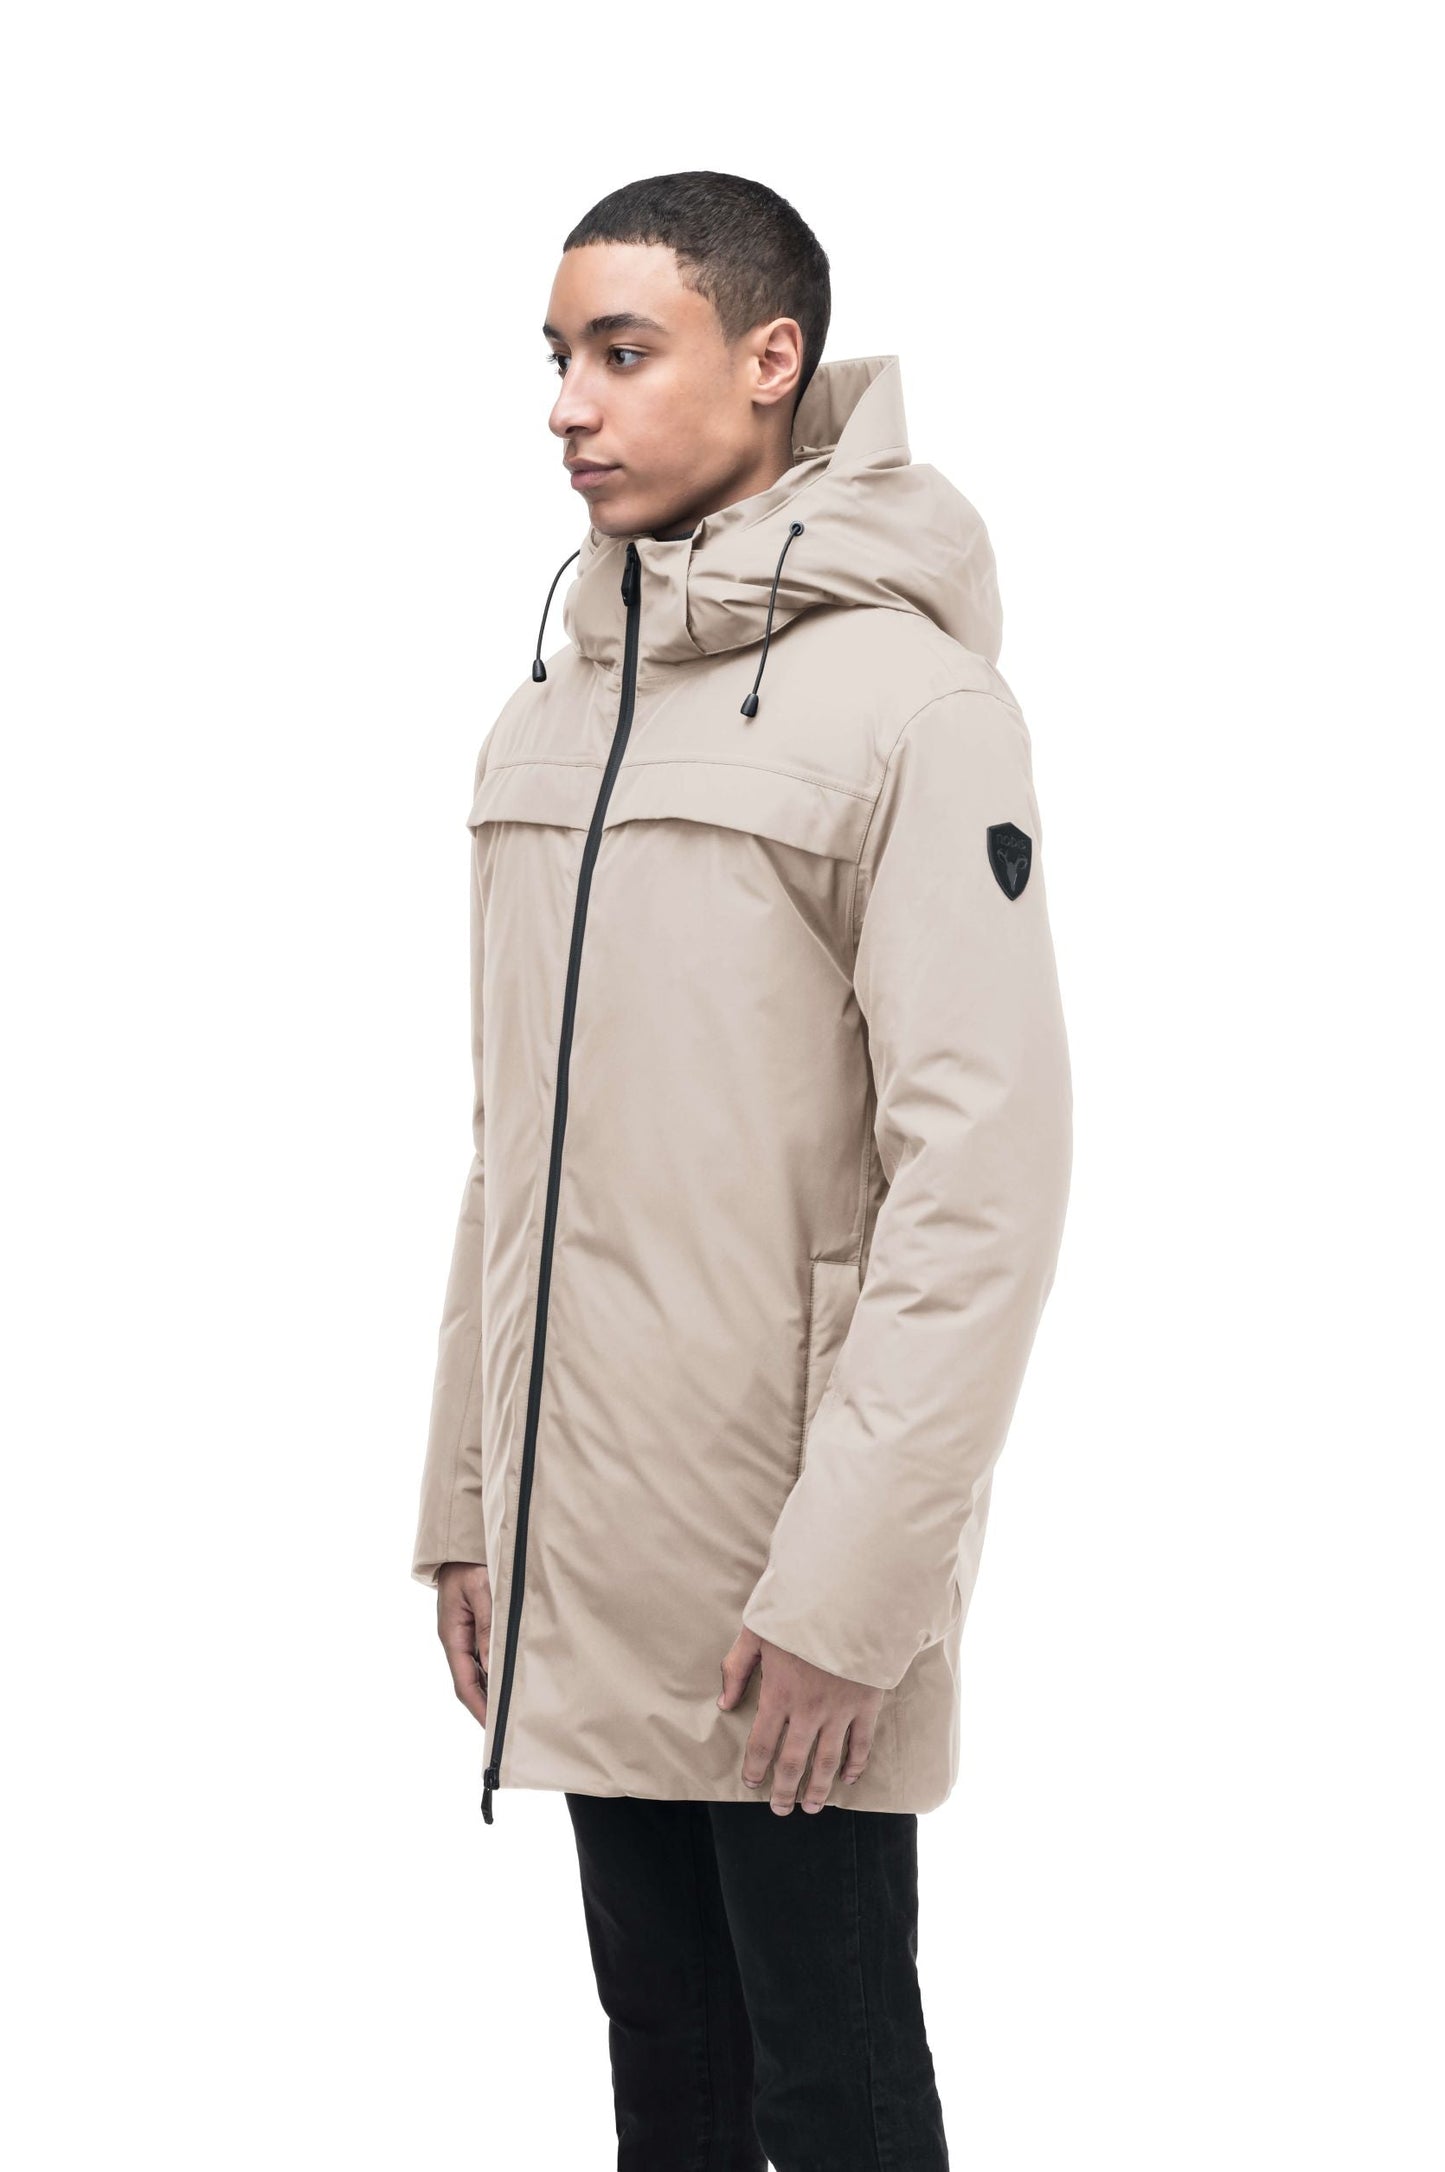 Atlas Men's Performance Parka in thigh length, Canadian duck down insulation, removable hood, and two-way zipper, in Clay